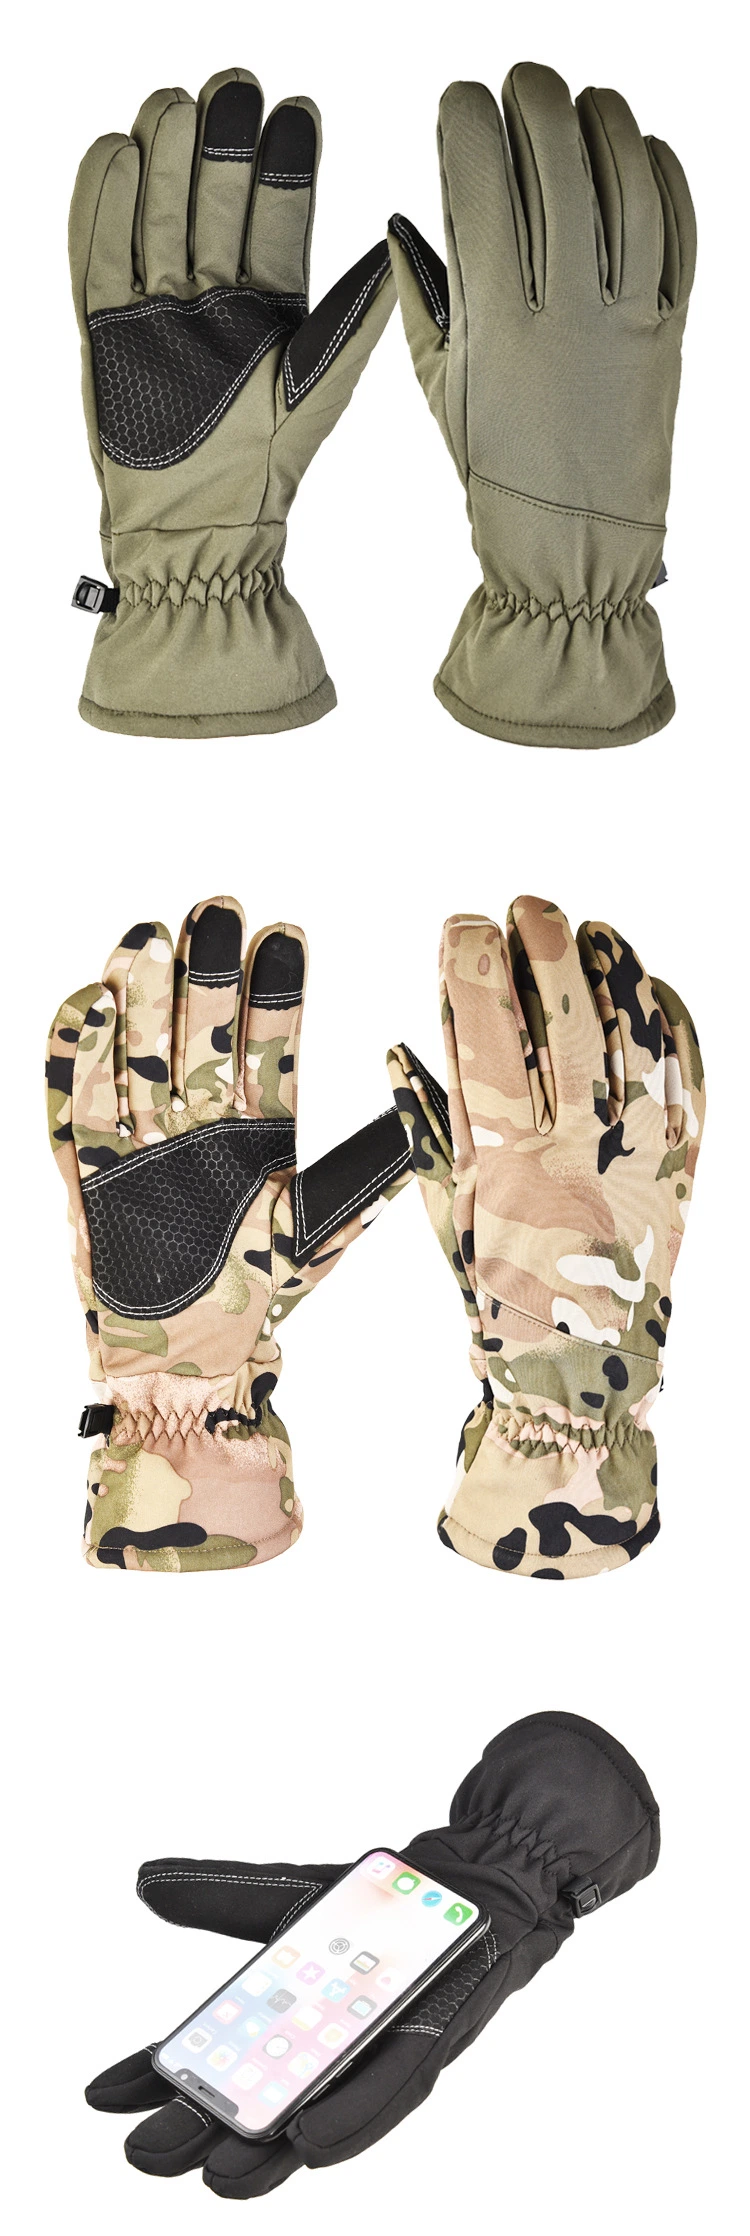 Ready Sale Winter Warm Ski Gloves Touch Screen Outdoor Tactical Gloves